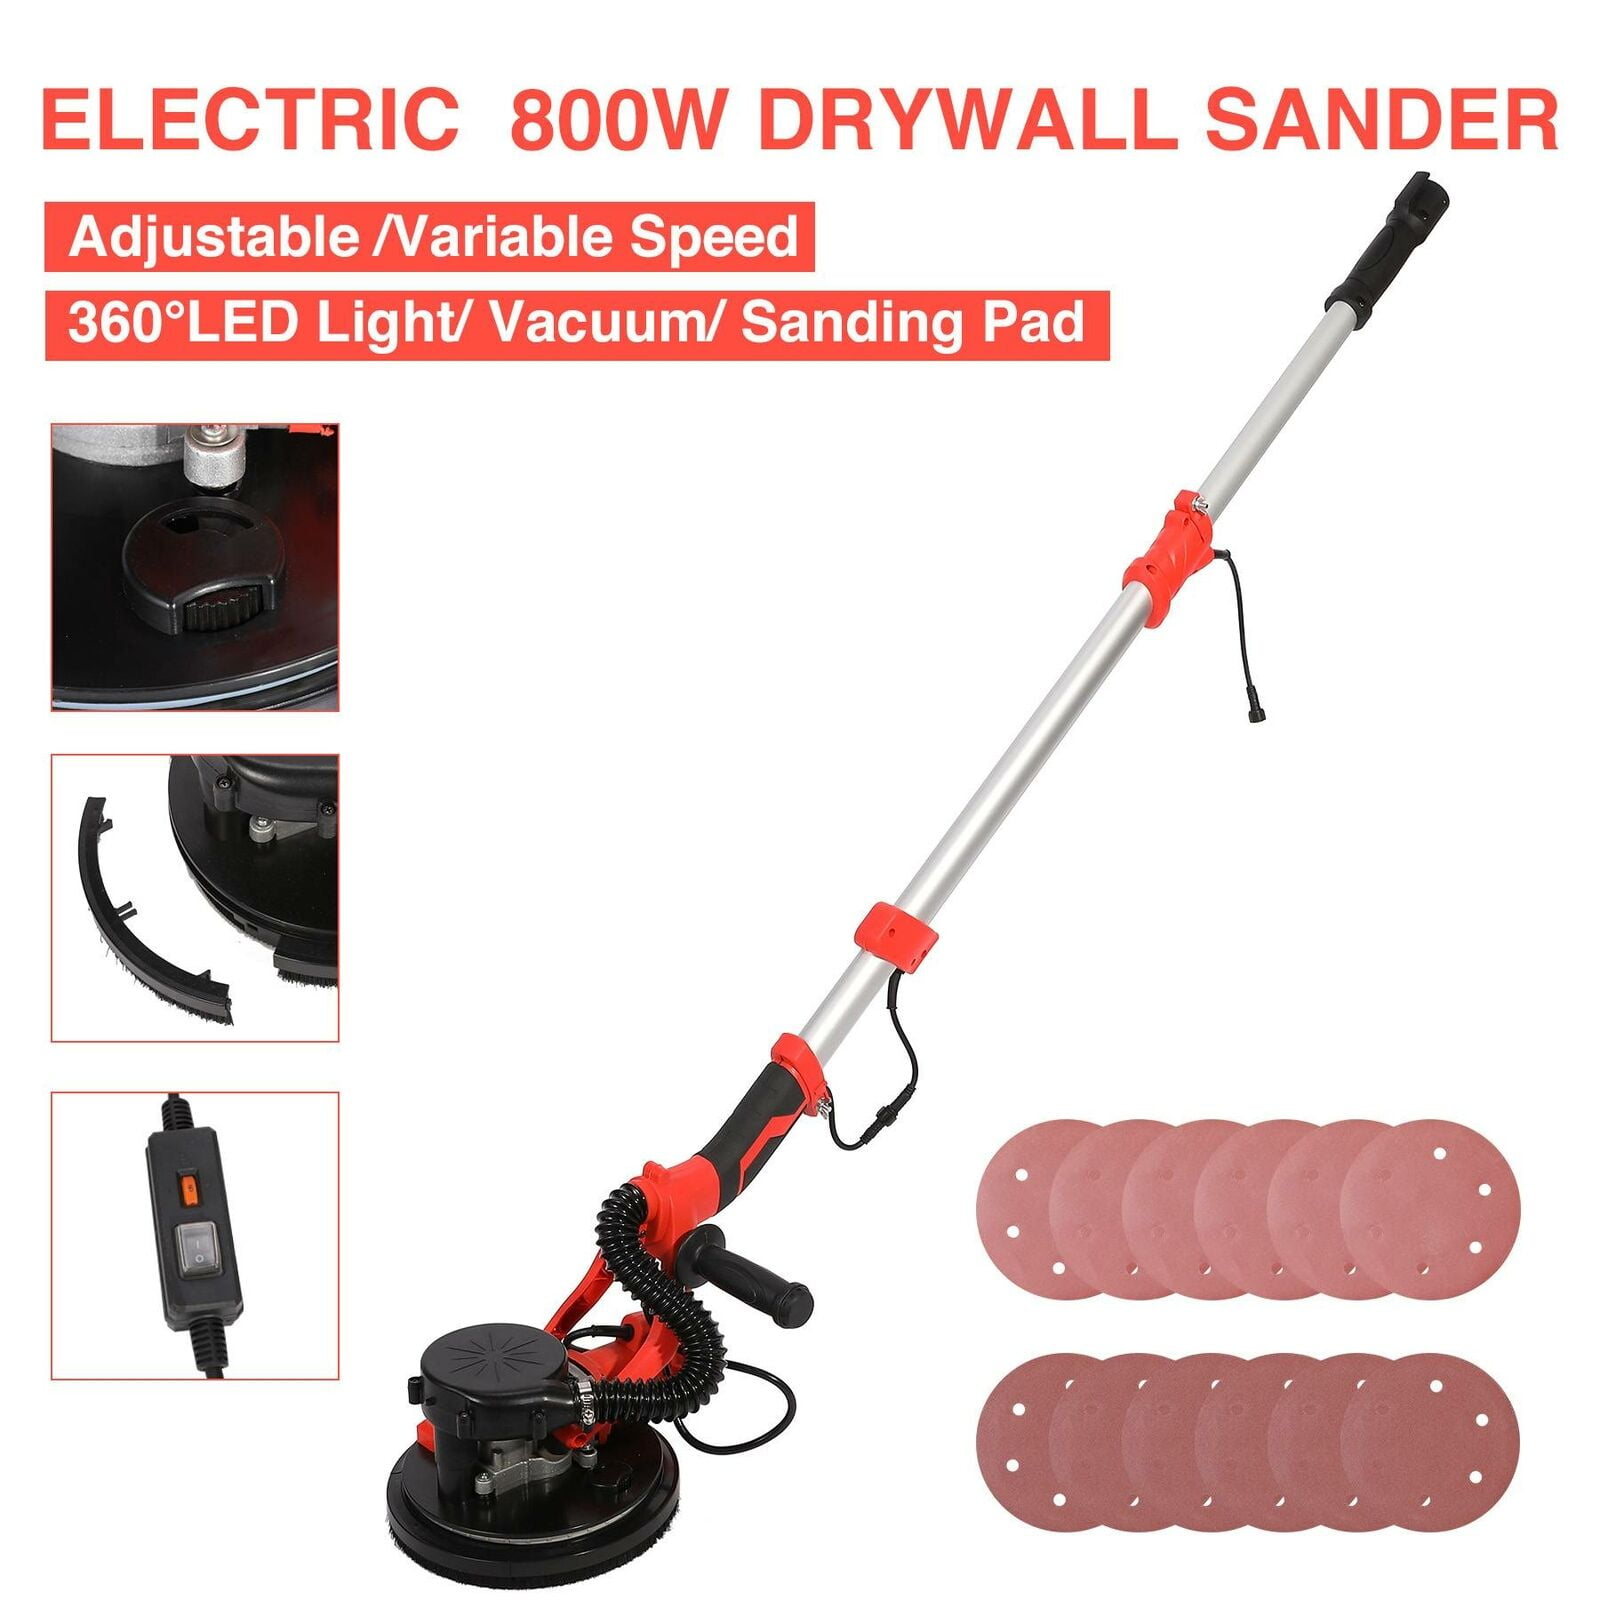 800W electric adjustable speed plasterboard sander with vacuum and LED light 